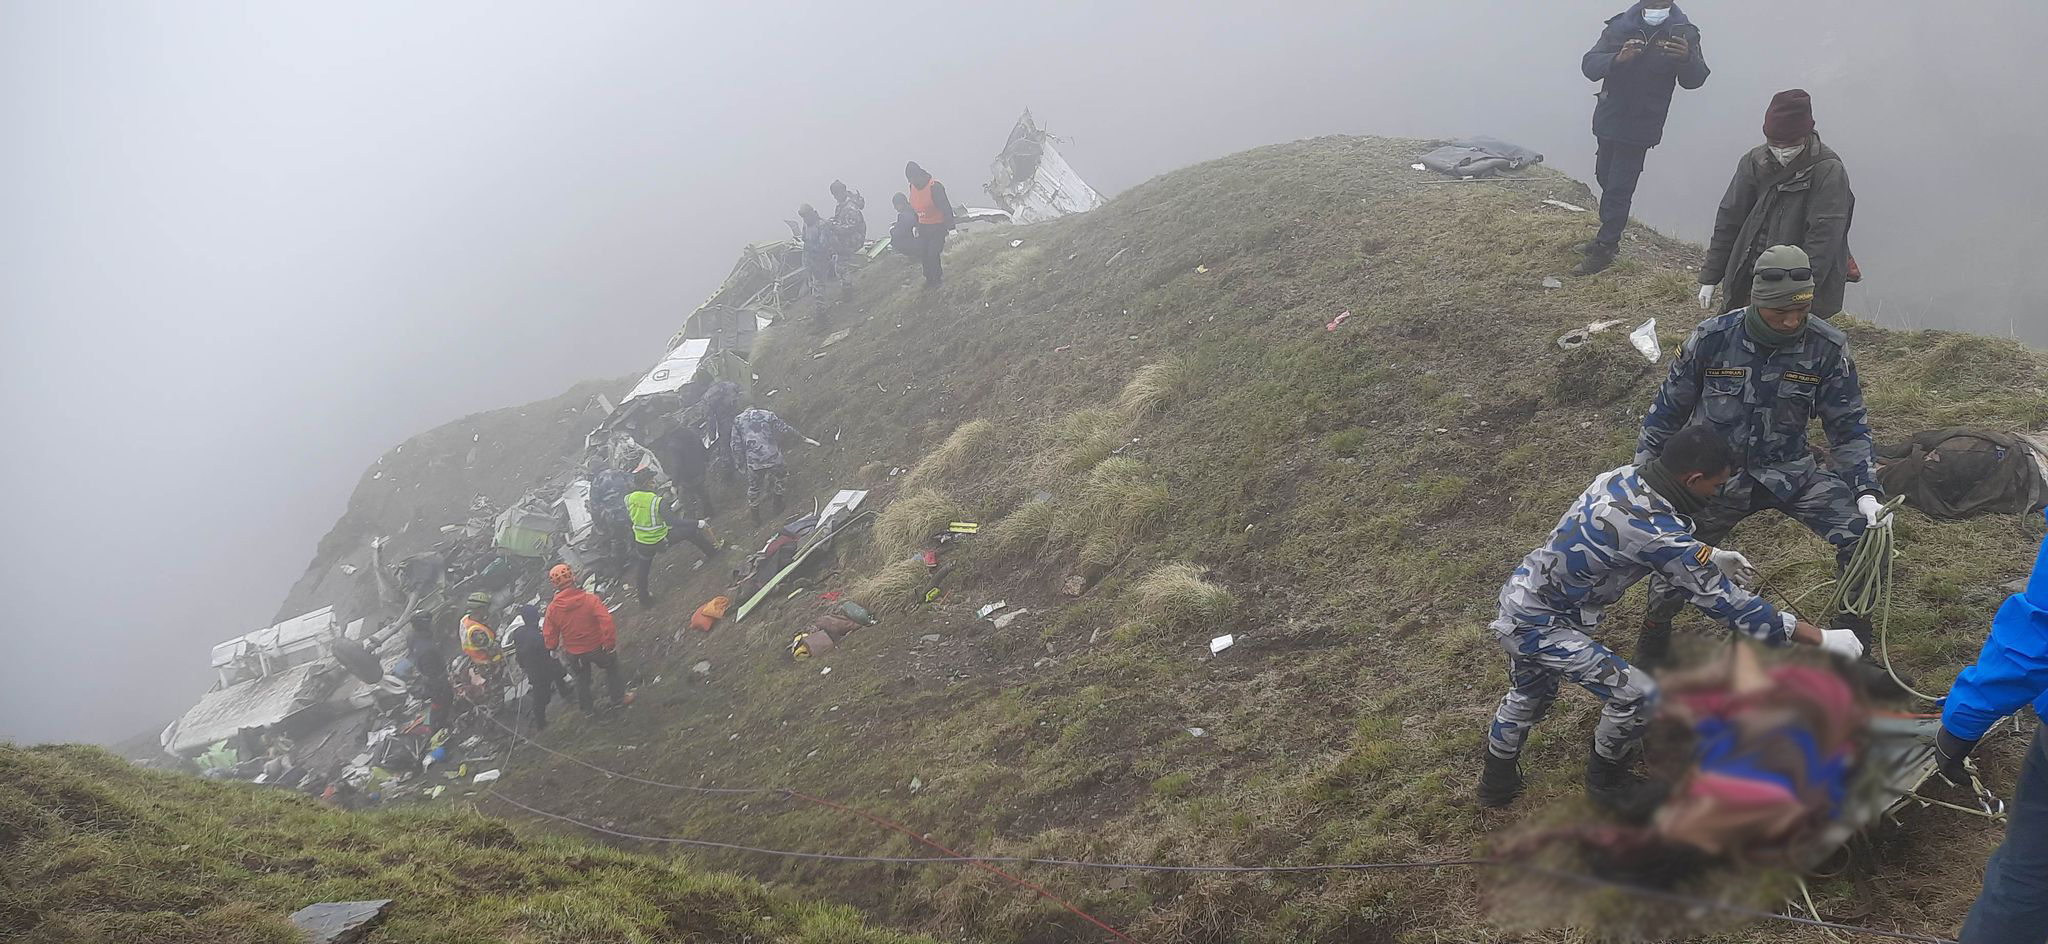 Tara Air crash: 14 bodies recovered; search underway to find others